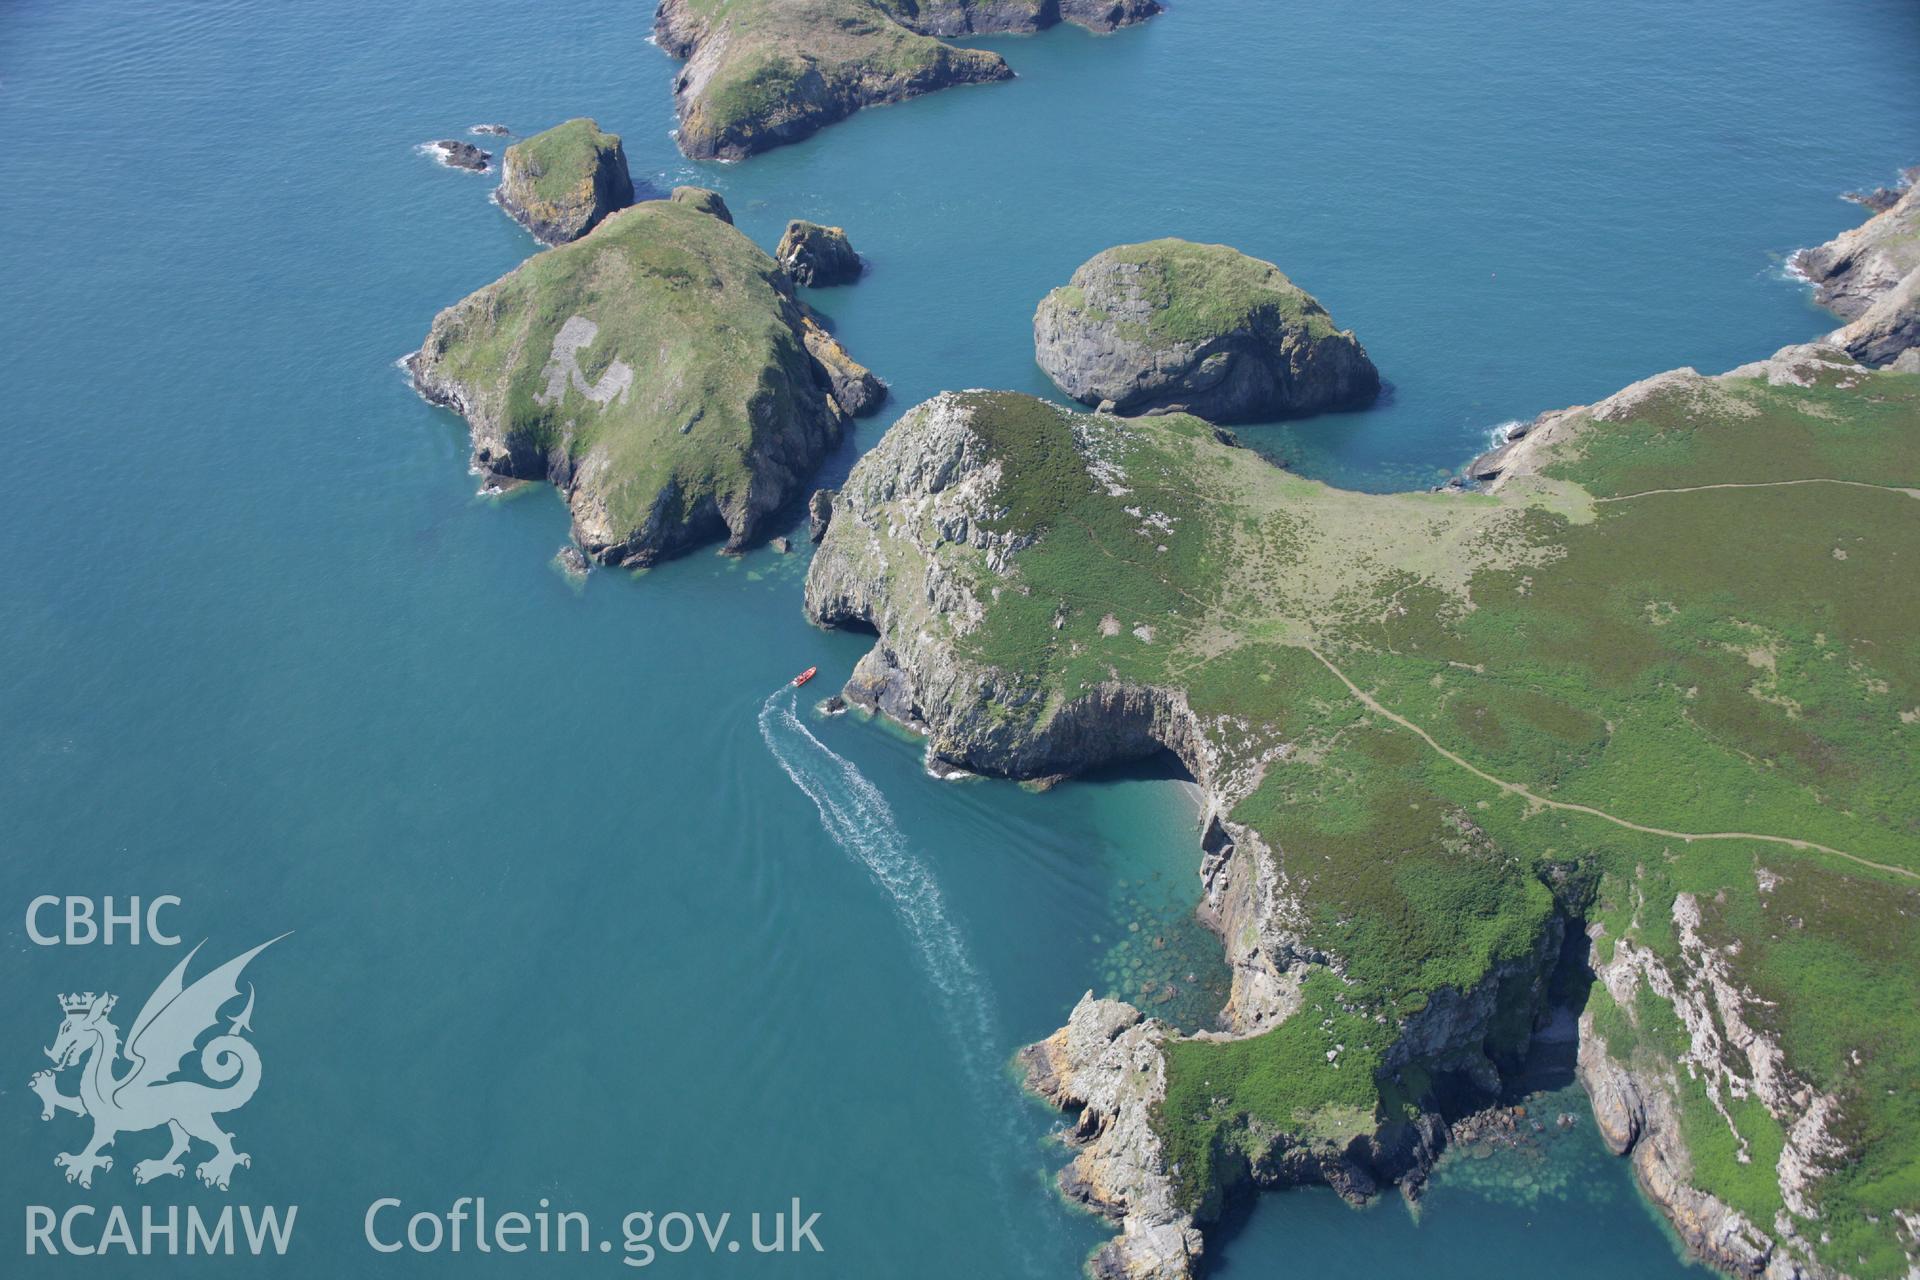 RCAHMW colour oblique aerial photograph of Ramsey Island. Taken on 14 July 2006 by Toby Driver.